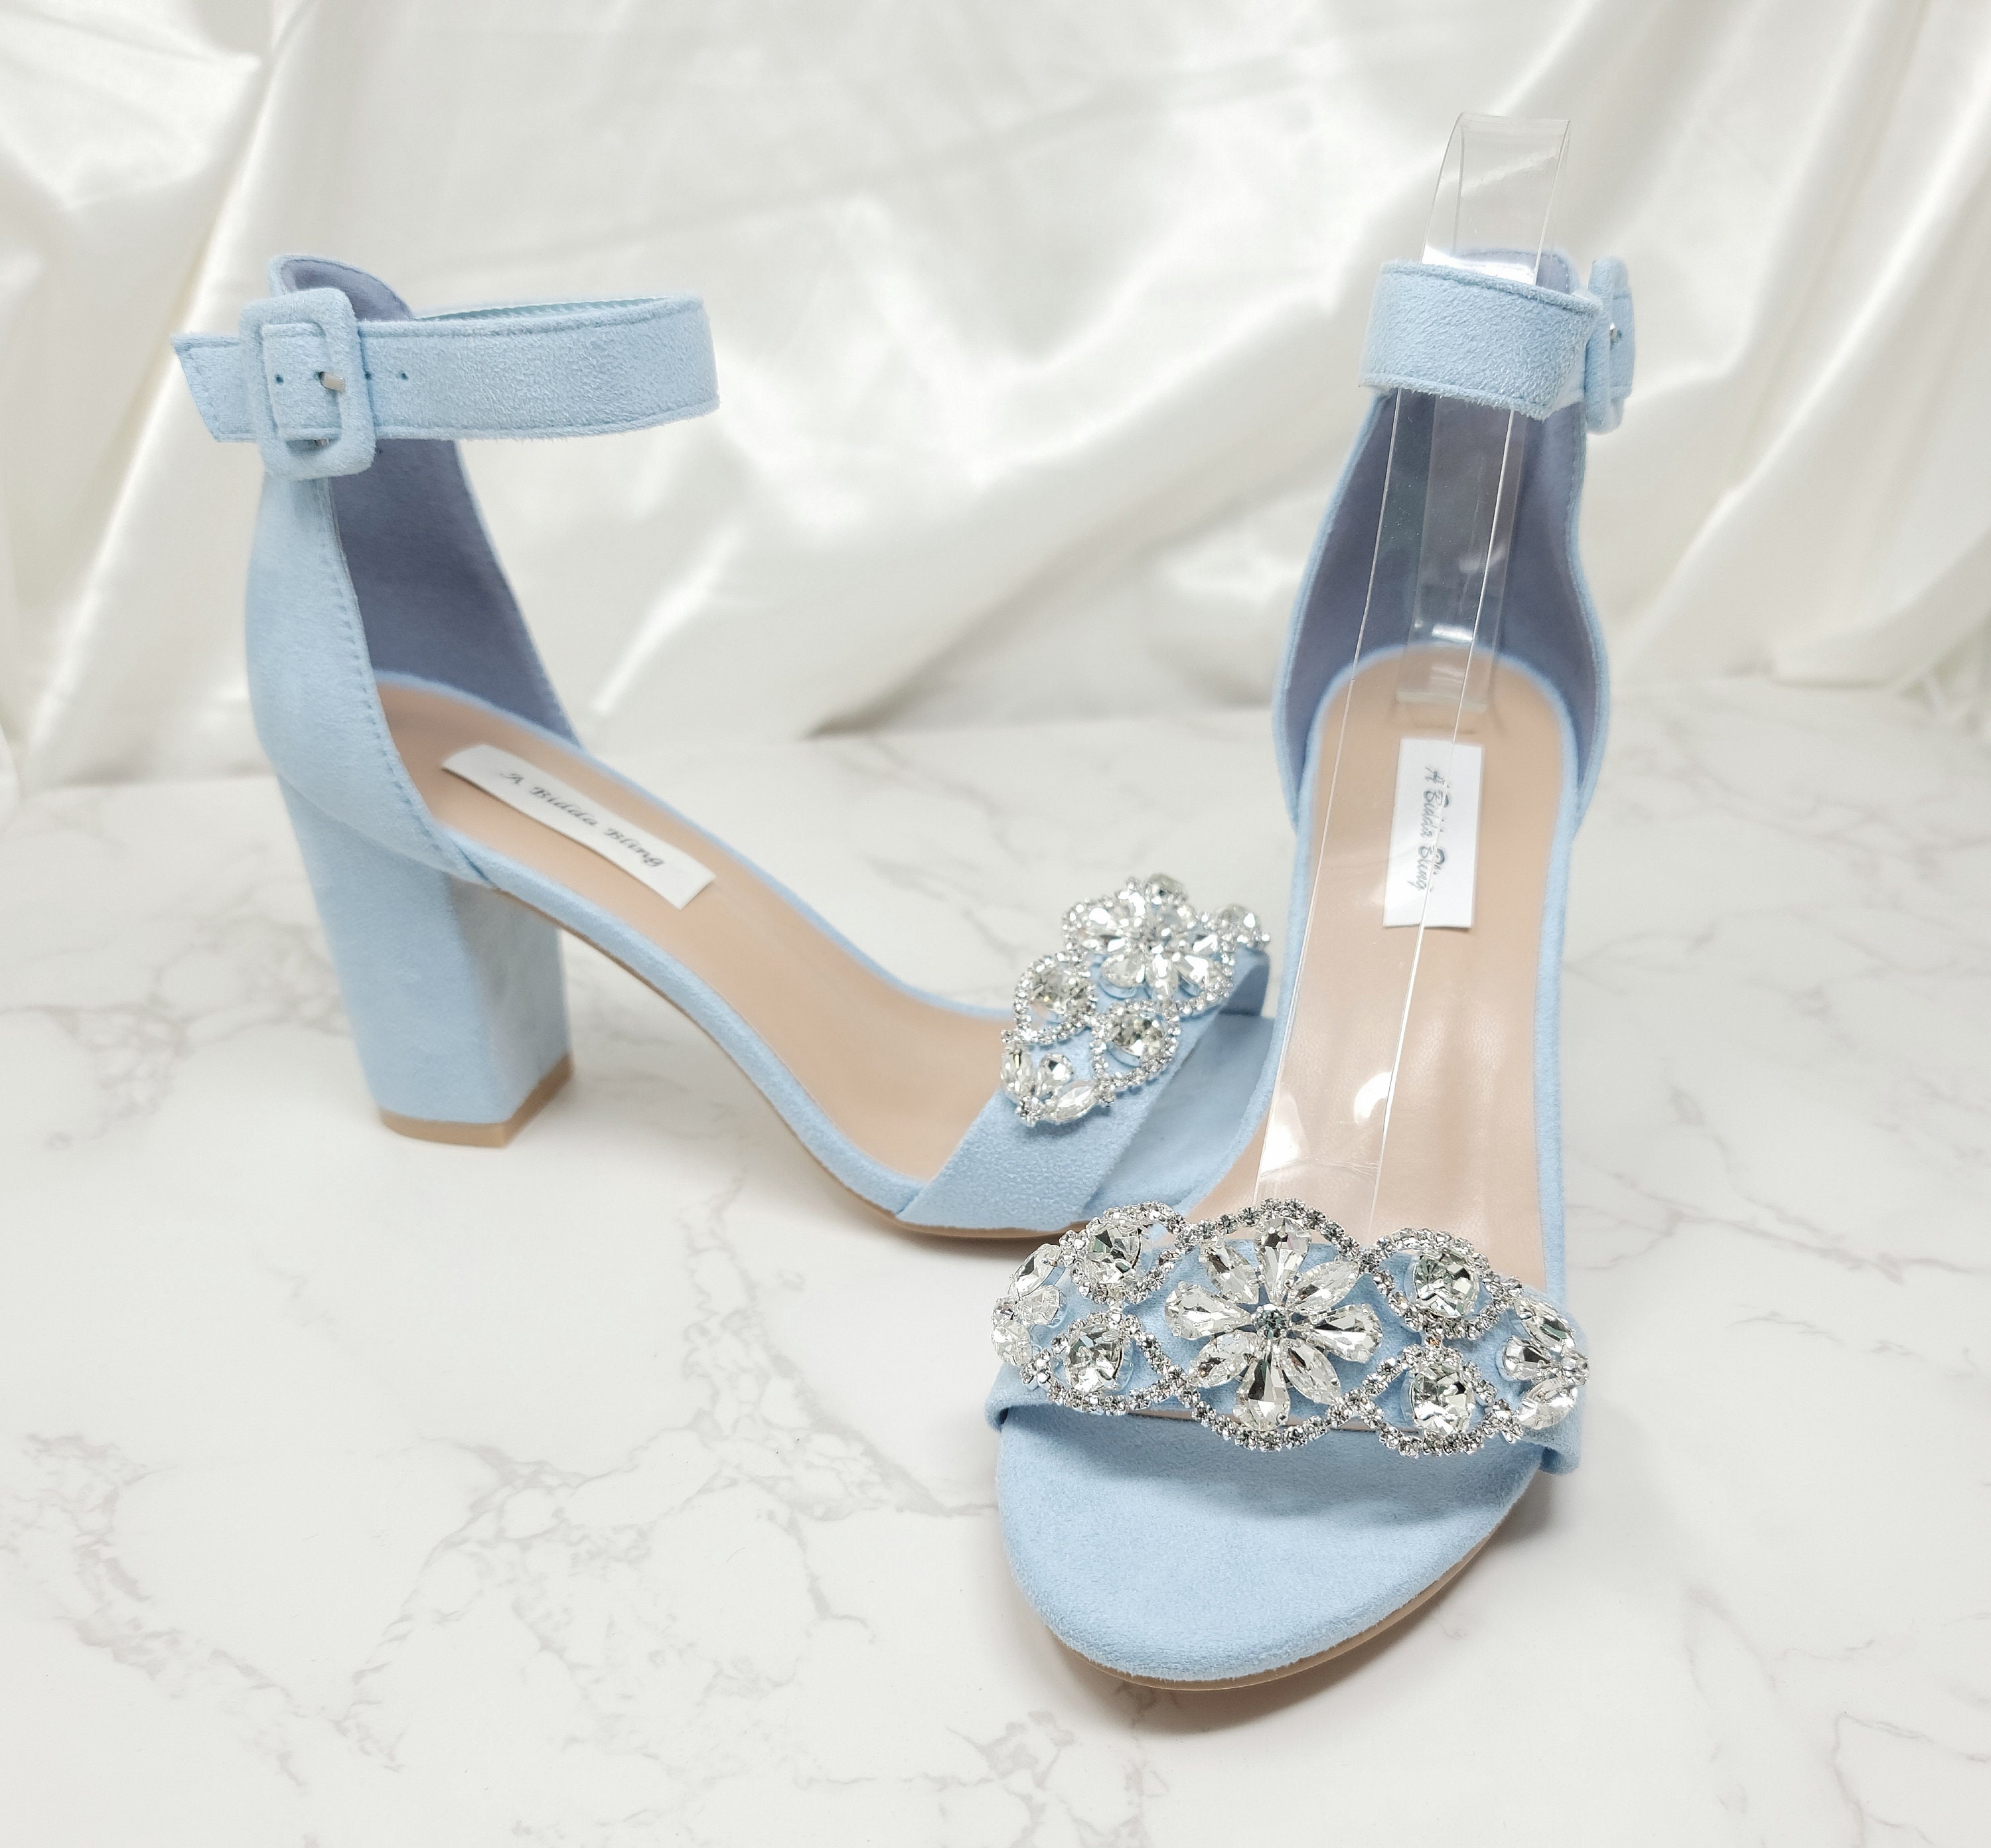 Something Blue Blue Wedding Shoes Bridal Shoes Wedding Heels Wedding Pumps  Shoes With Decoration Bridal Heels Shoes for Bride - Etsy | Blue wedding  shoes, Blue bridal shoes, Blue heels wedding